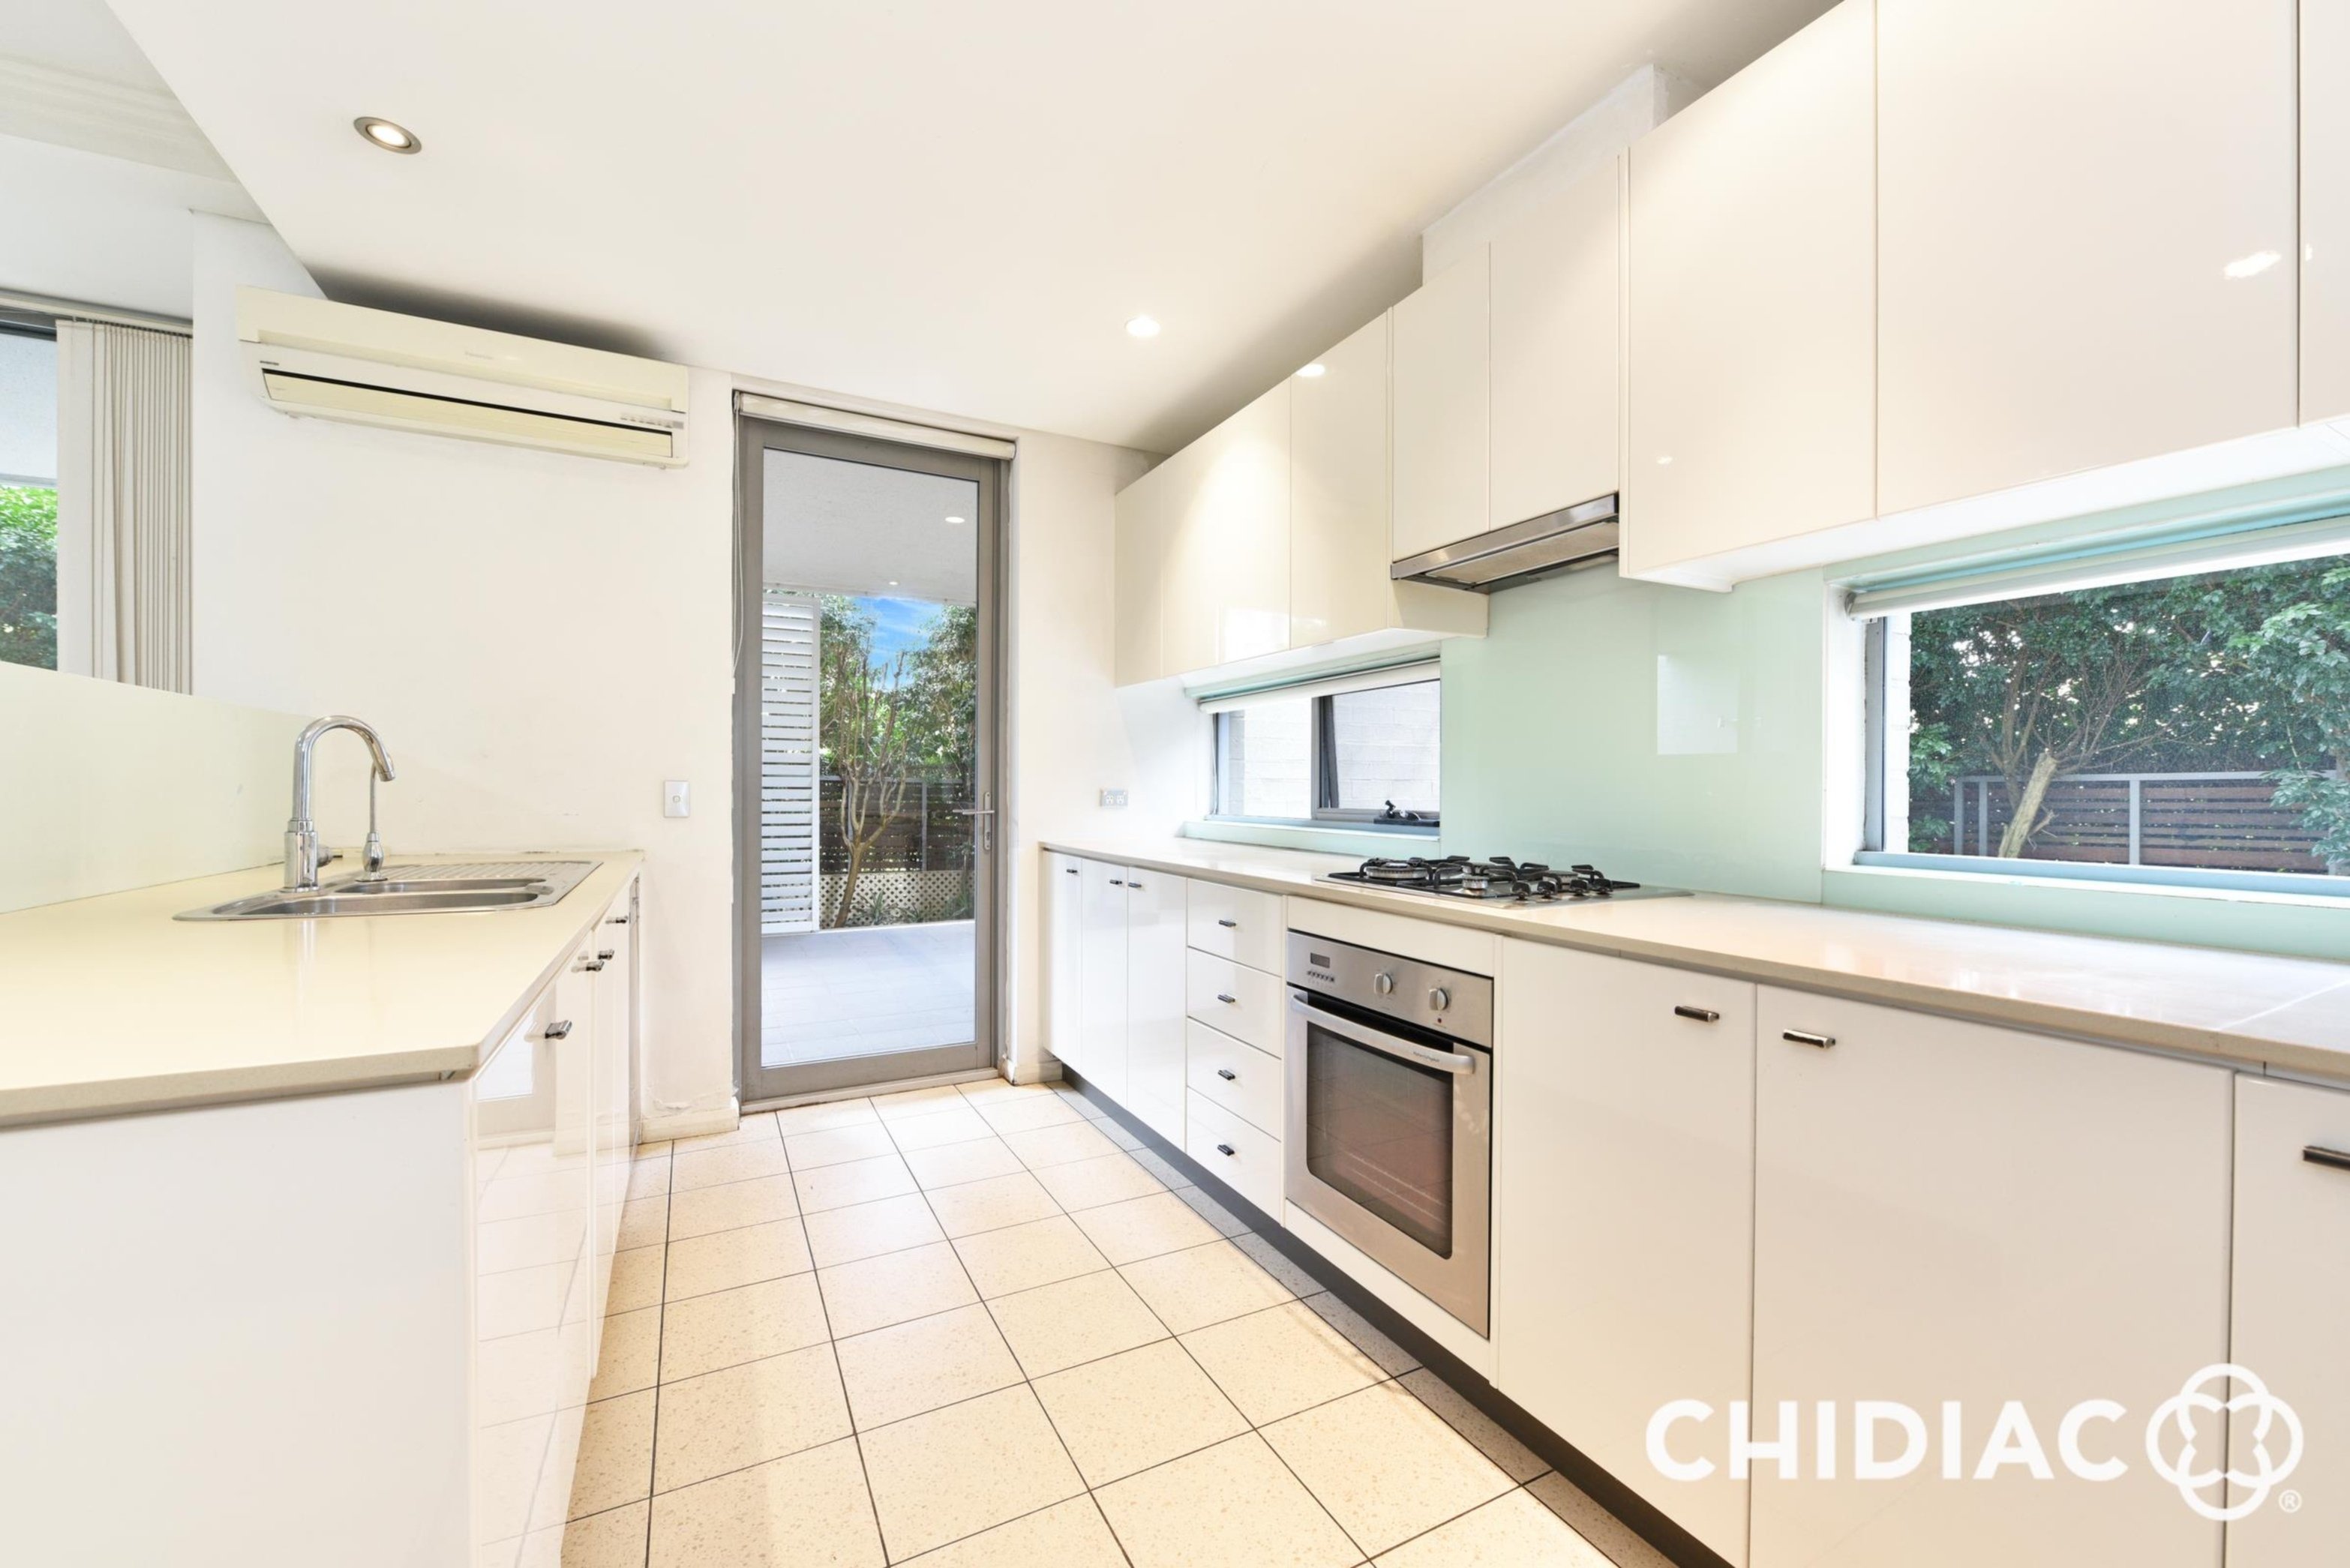 123/3 Stromboli Strait, Wentworth Point Leased by Chidiac Realty - image 3